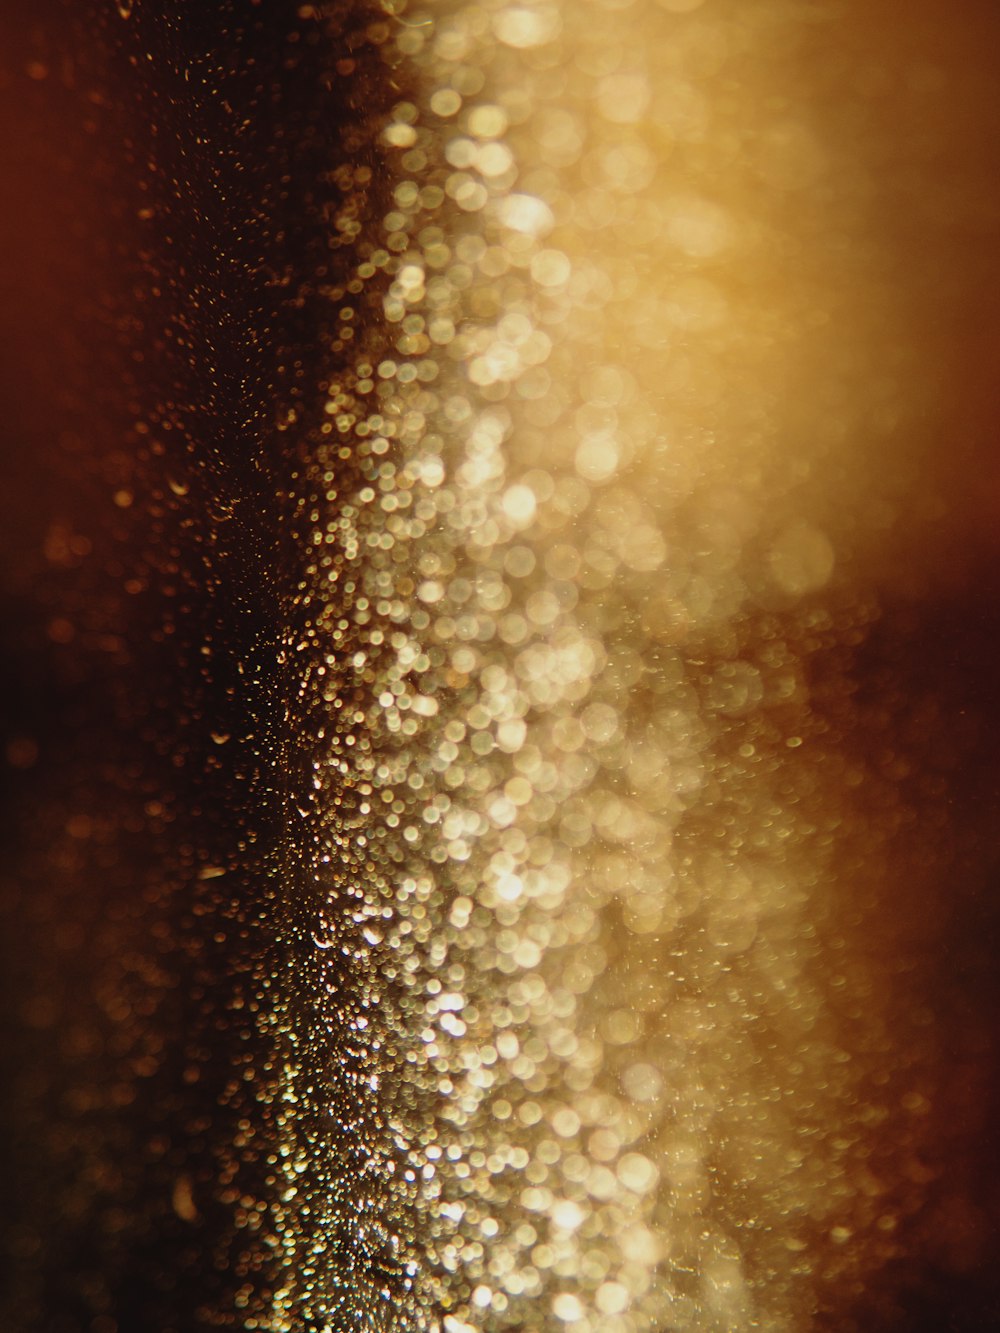 a blurry photo of some gold glitter